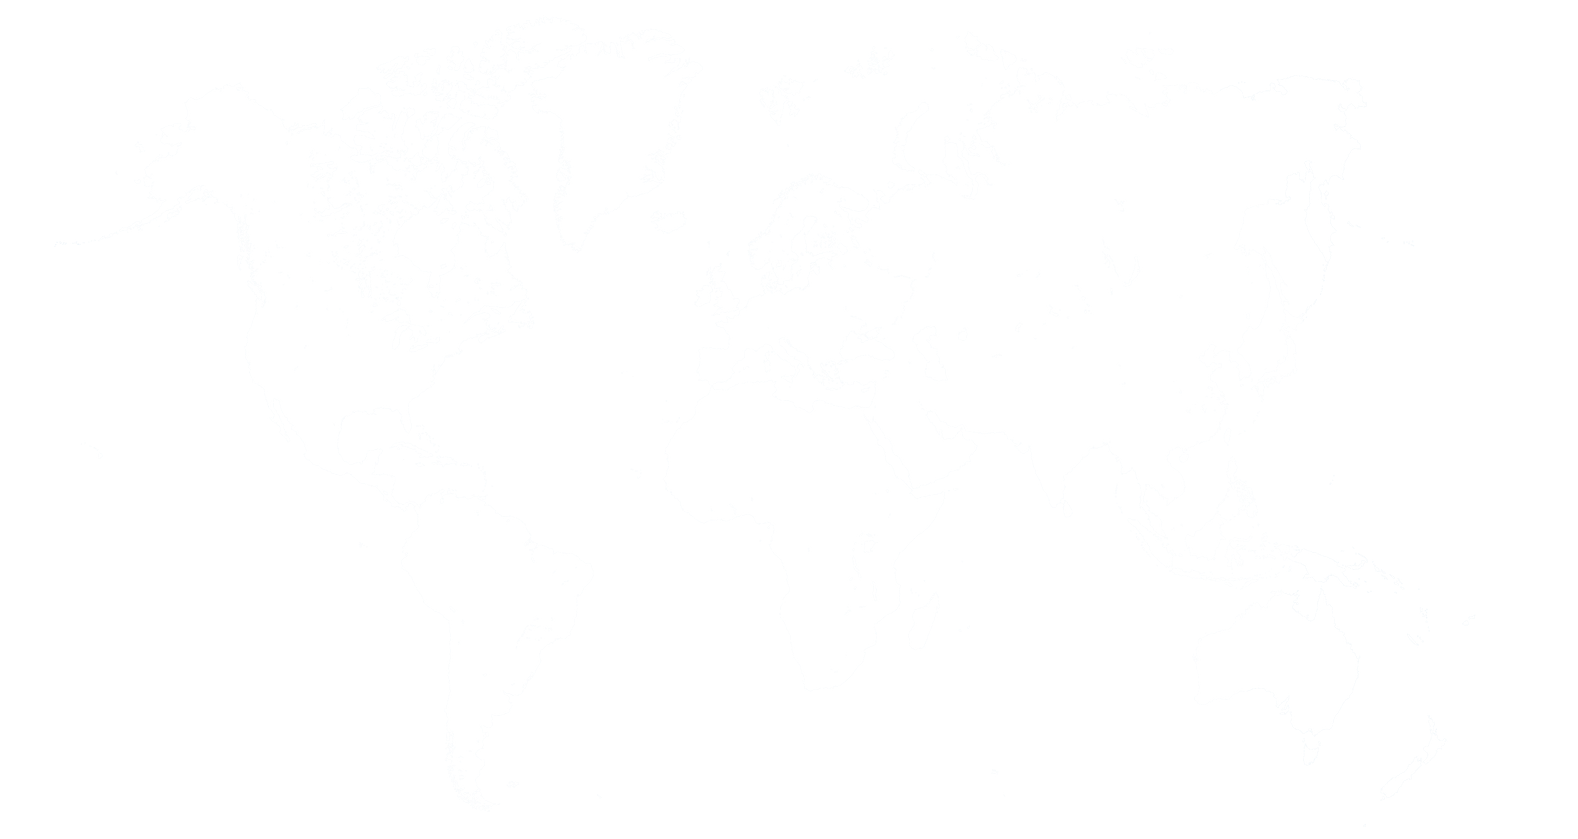 world-map.png